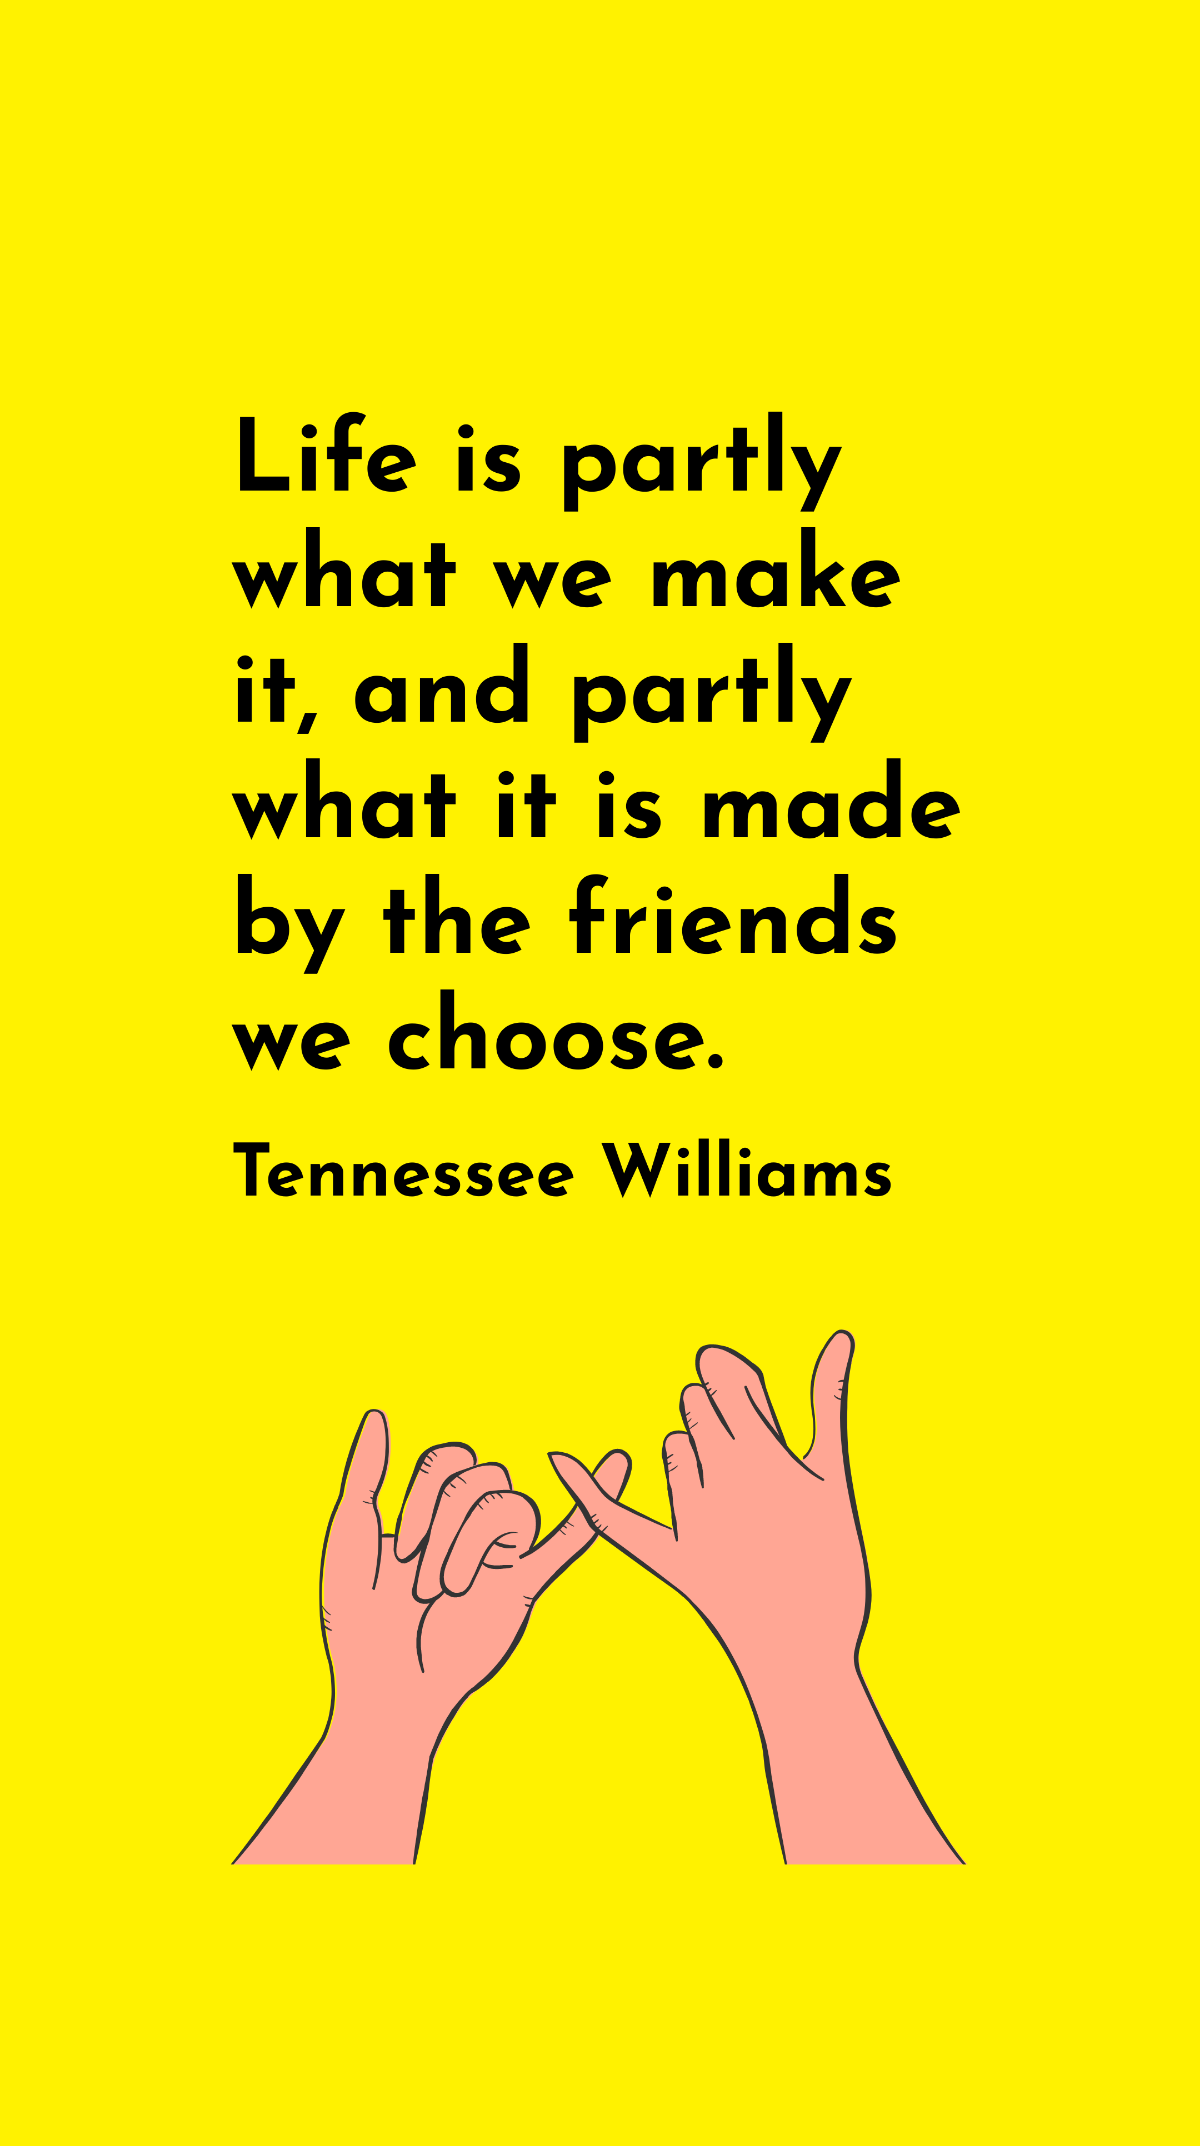 Tennessee Williams - Life is partly what we make it, and partly what it is made by the friends we choose. Template